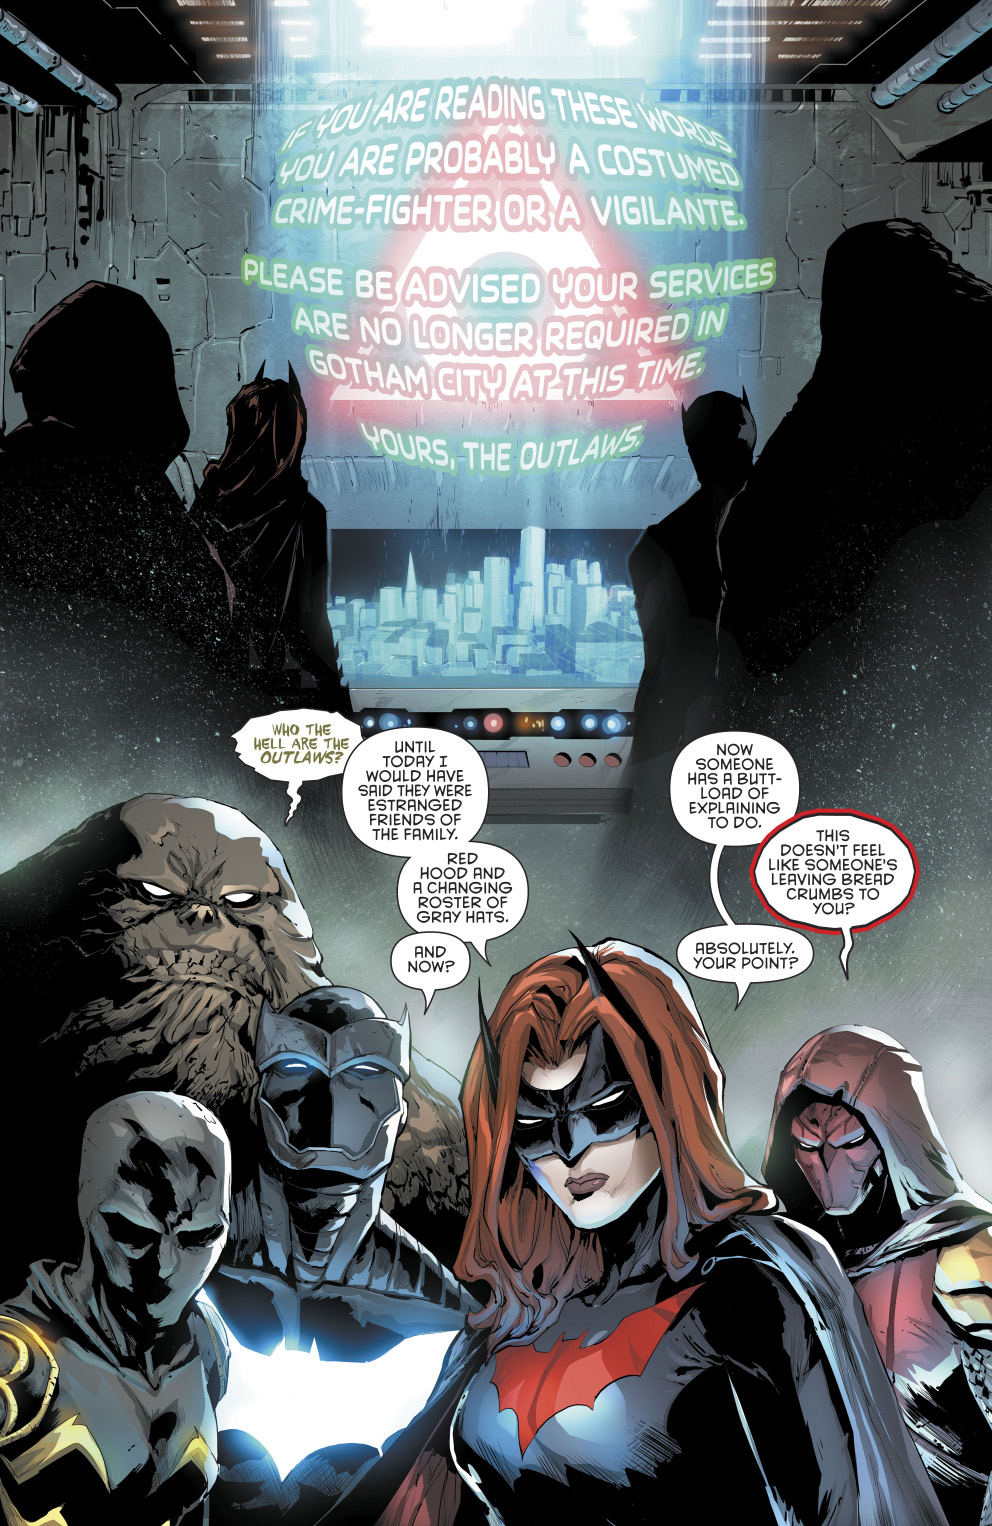 The Batman Family (Red Hood and the Outlaws Vol 2 #15) 